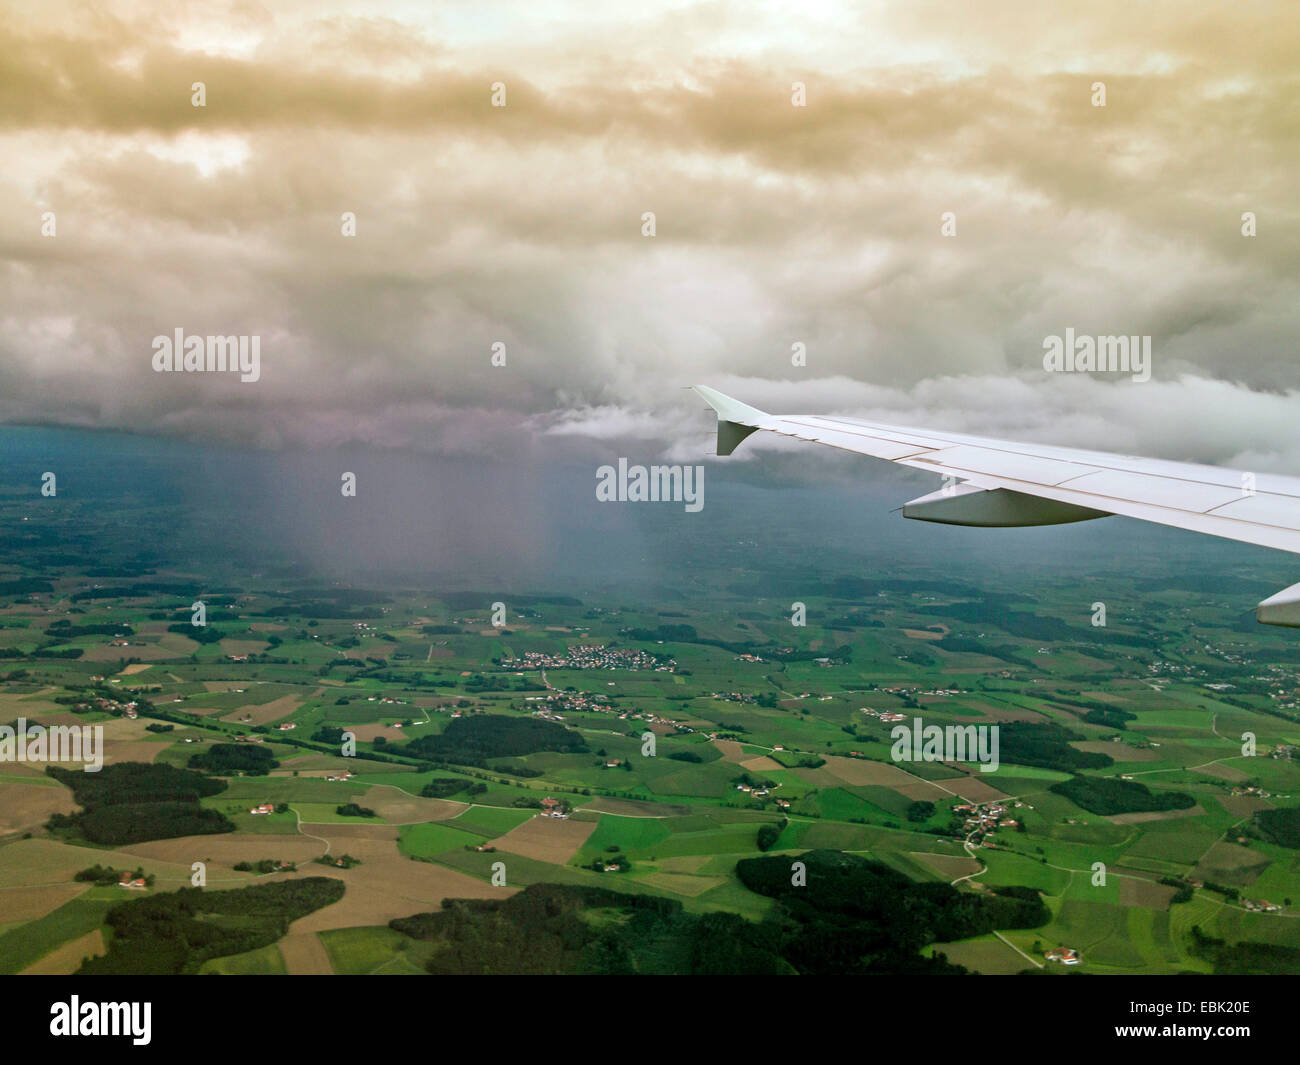 aerial view to rain clouds and rain shower, Germany, Bavaria, Flughafen Muenchen Stock Photo